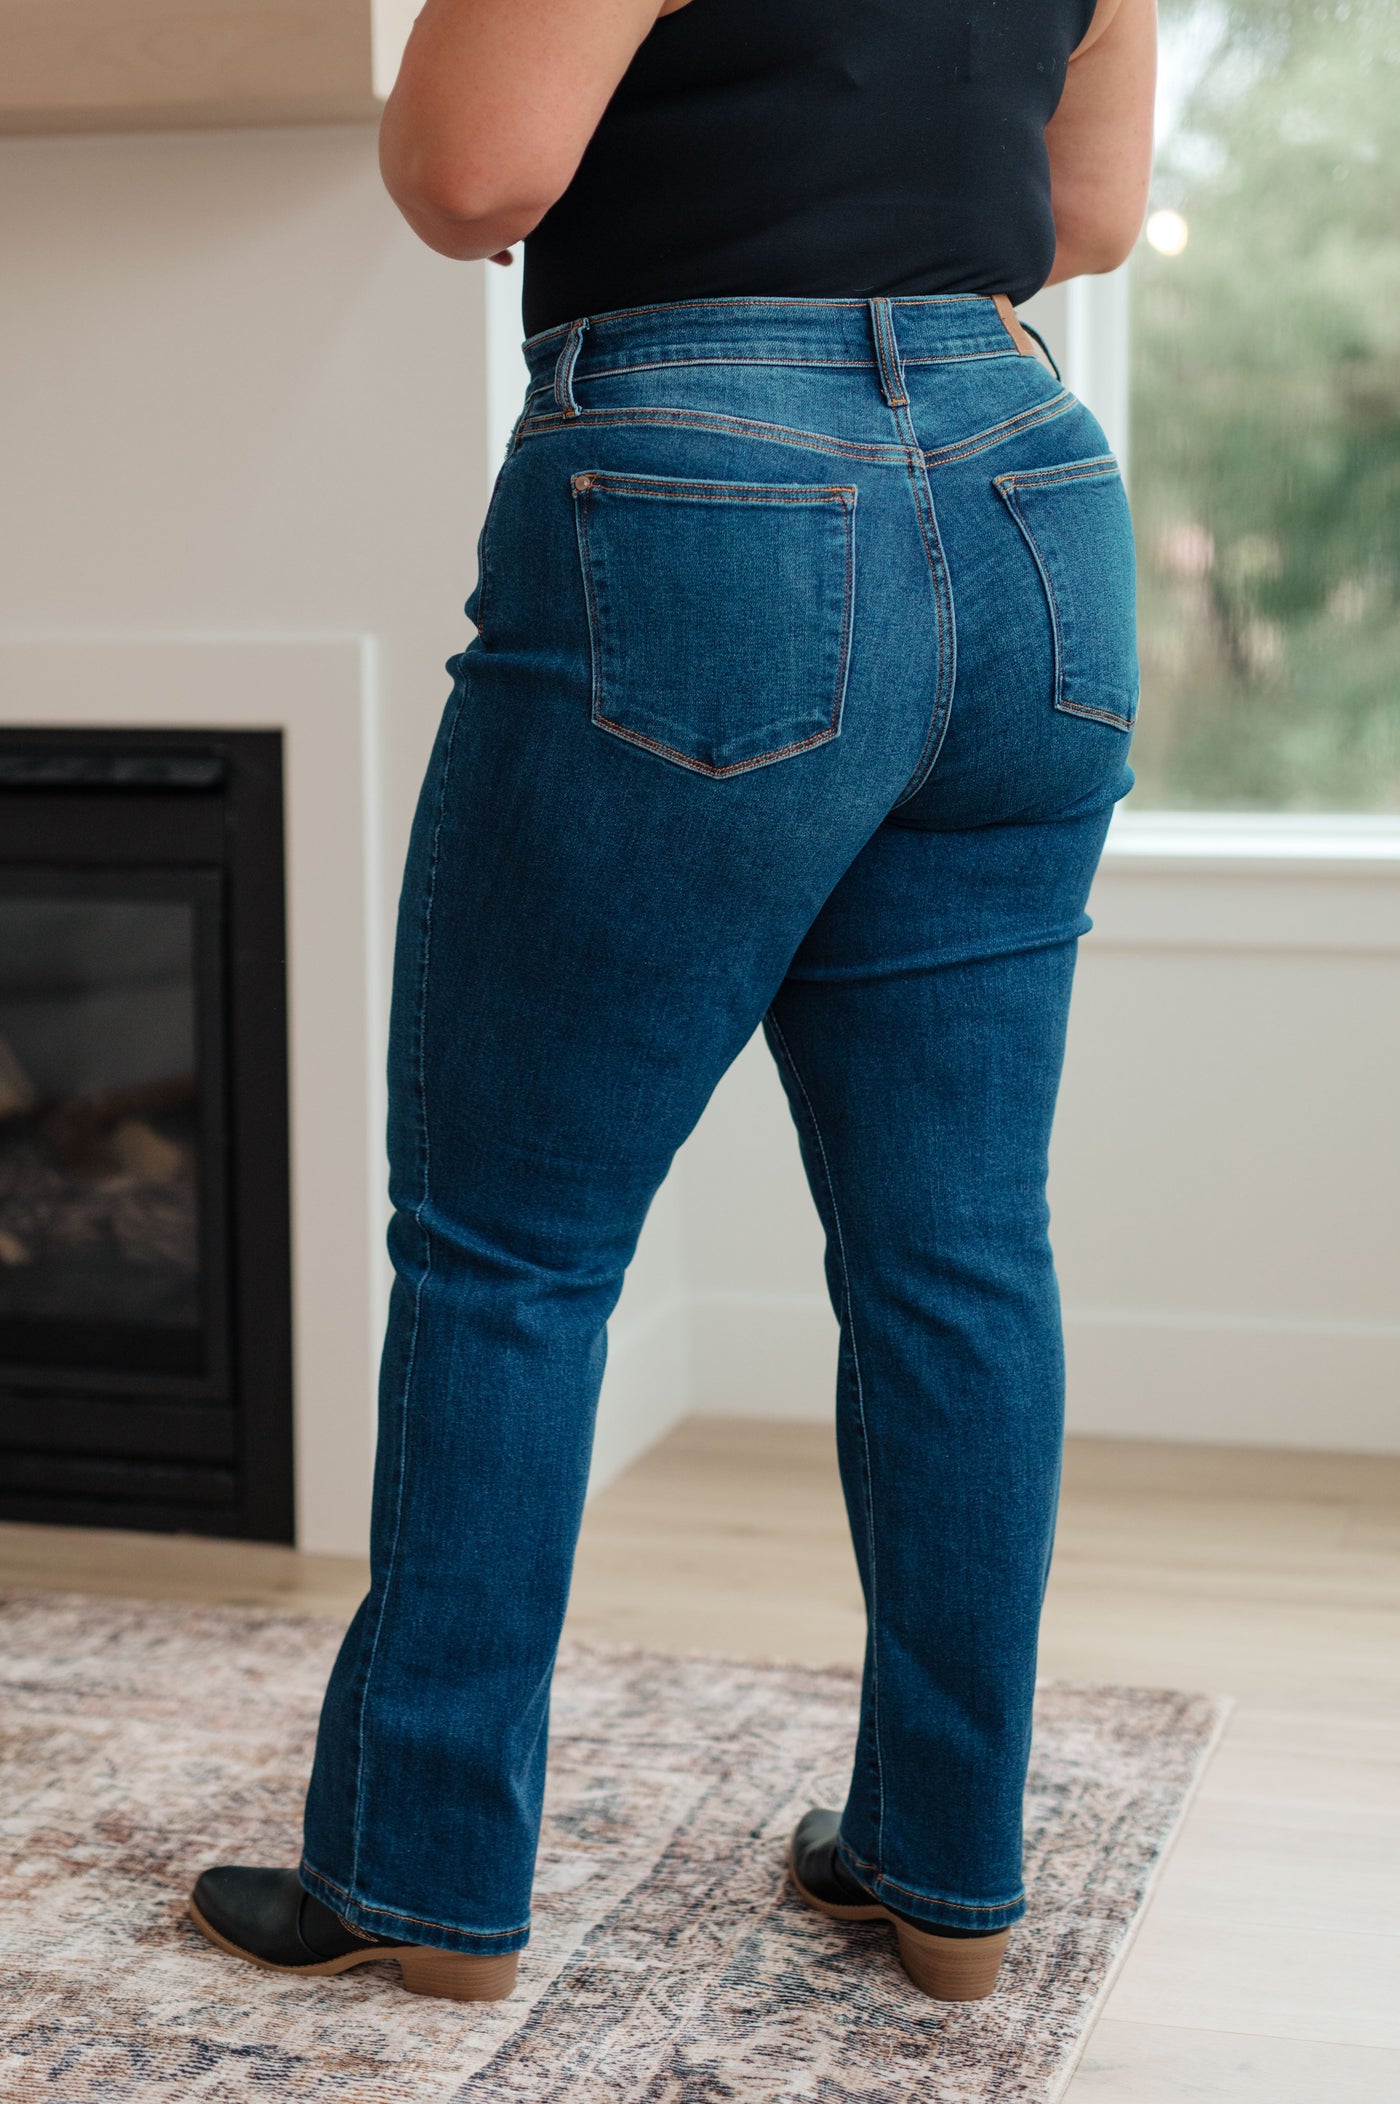 Sleek and stylish, they feature a high waist, hidden button fly, straight silhouette, a medium wash, and 4-way stretch for maximum comfort. Ready to take your look up a notch? Choose Pippa